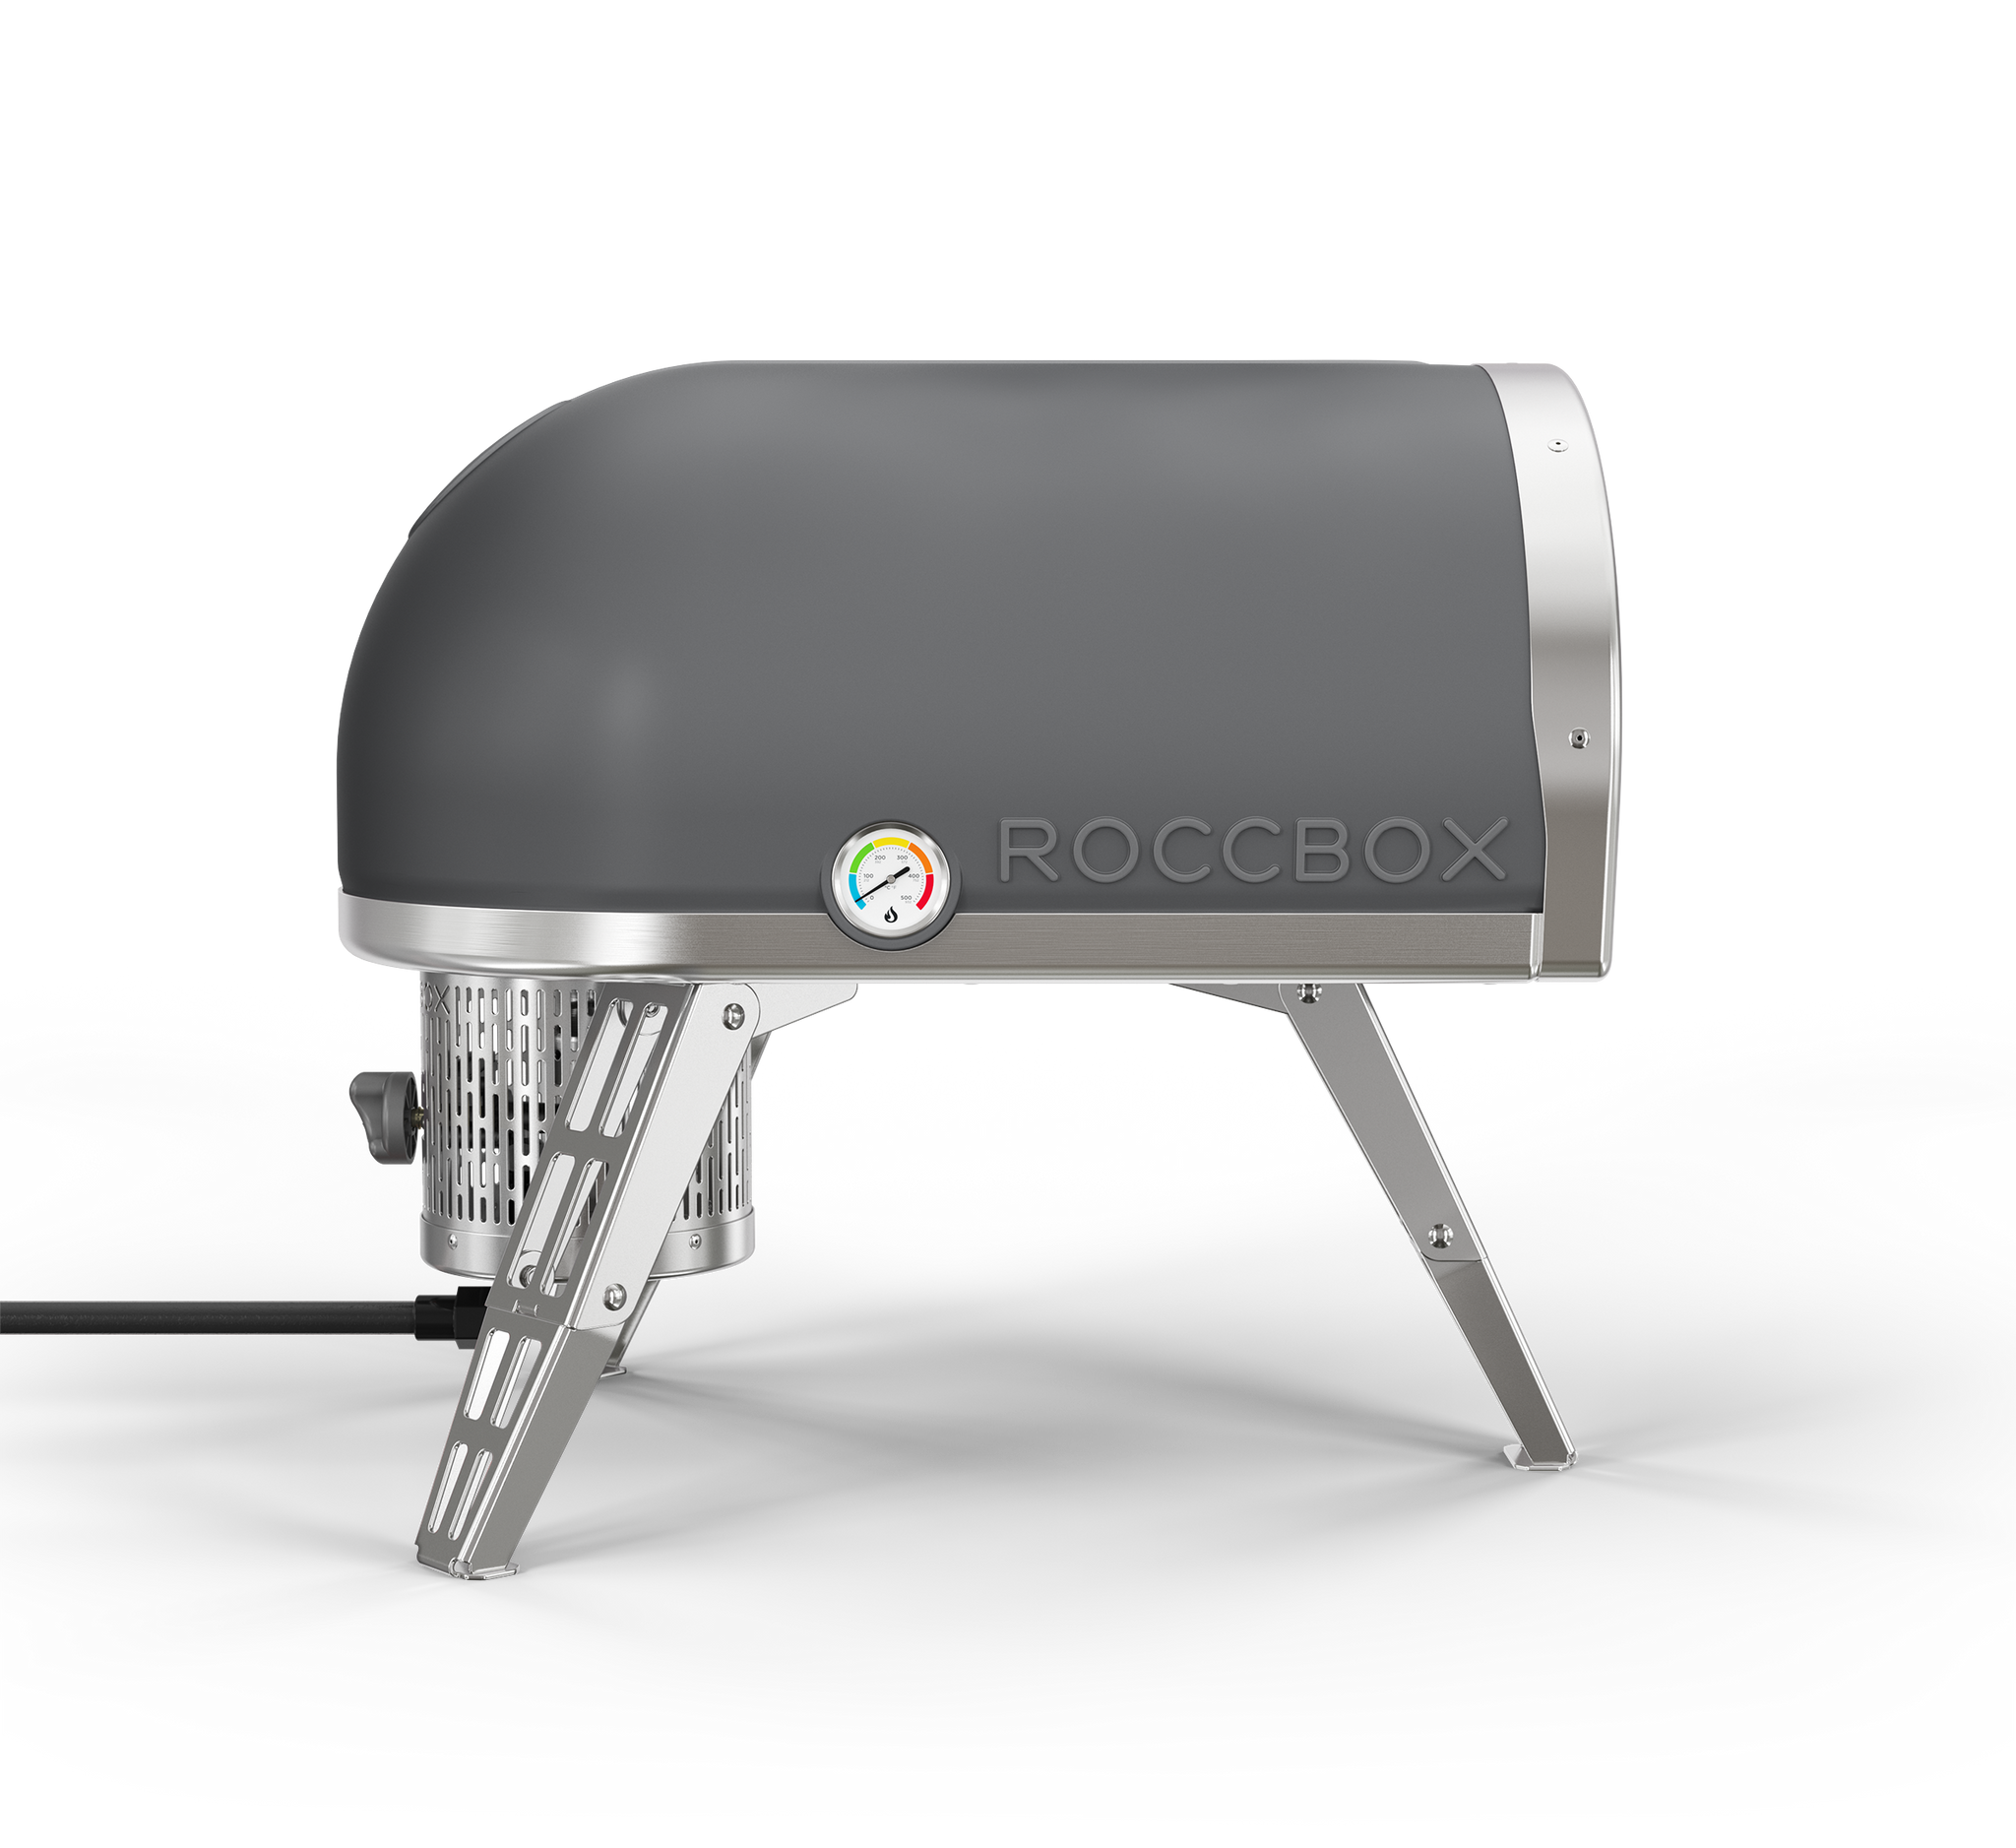 Pizza oven's infrared thermometer - Mustang Grill